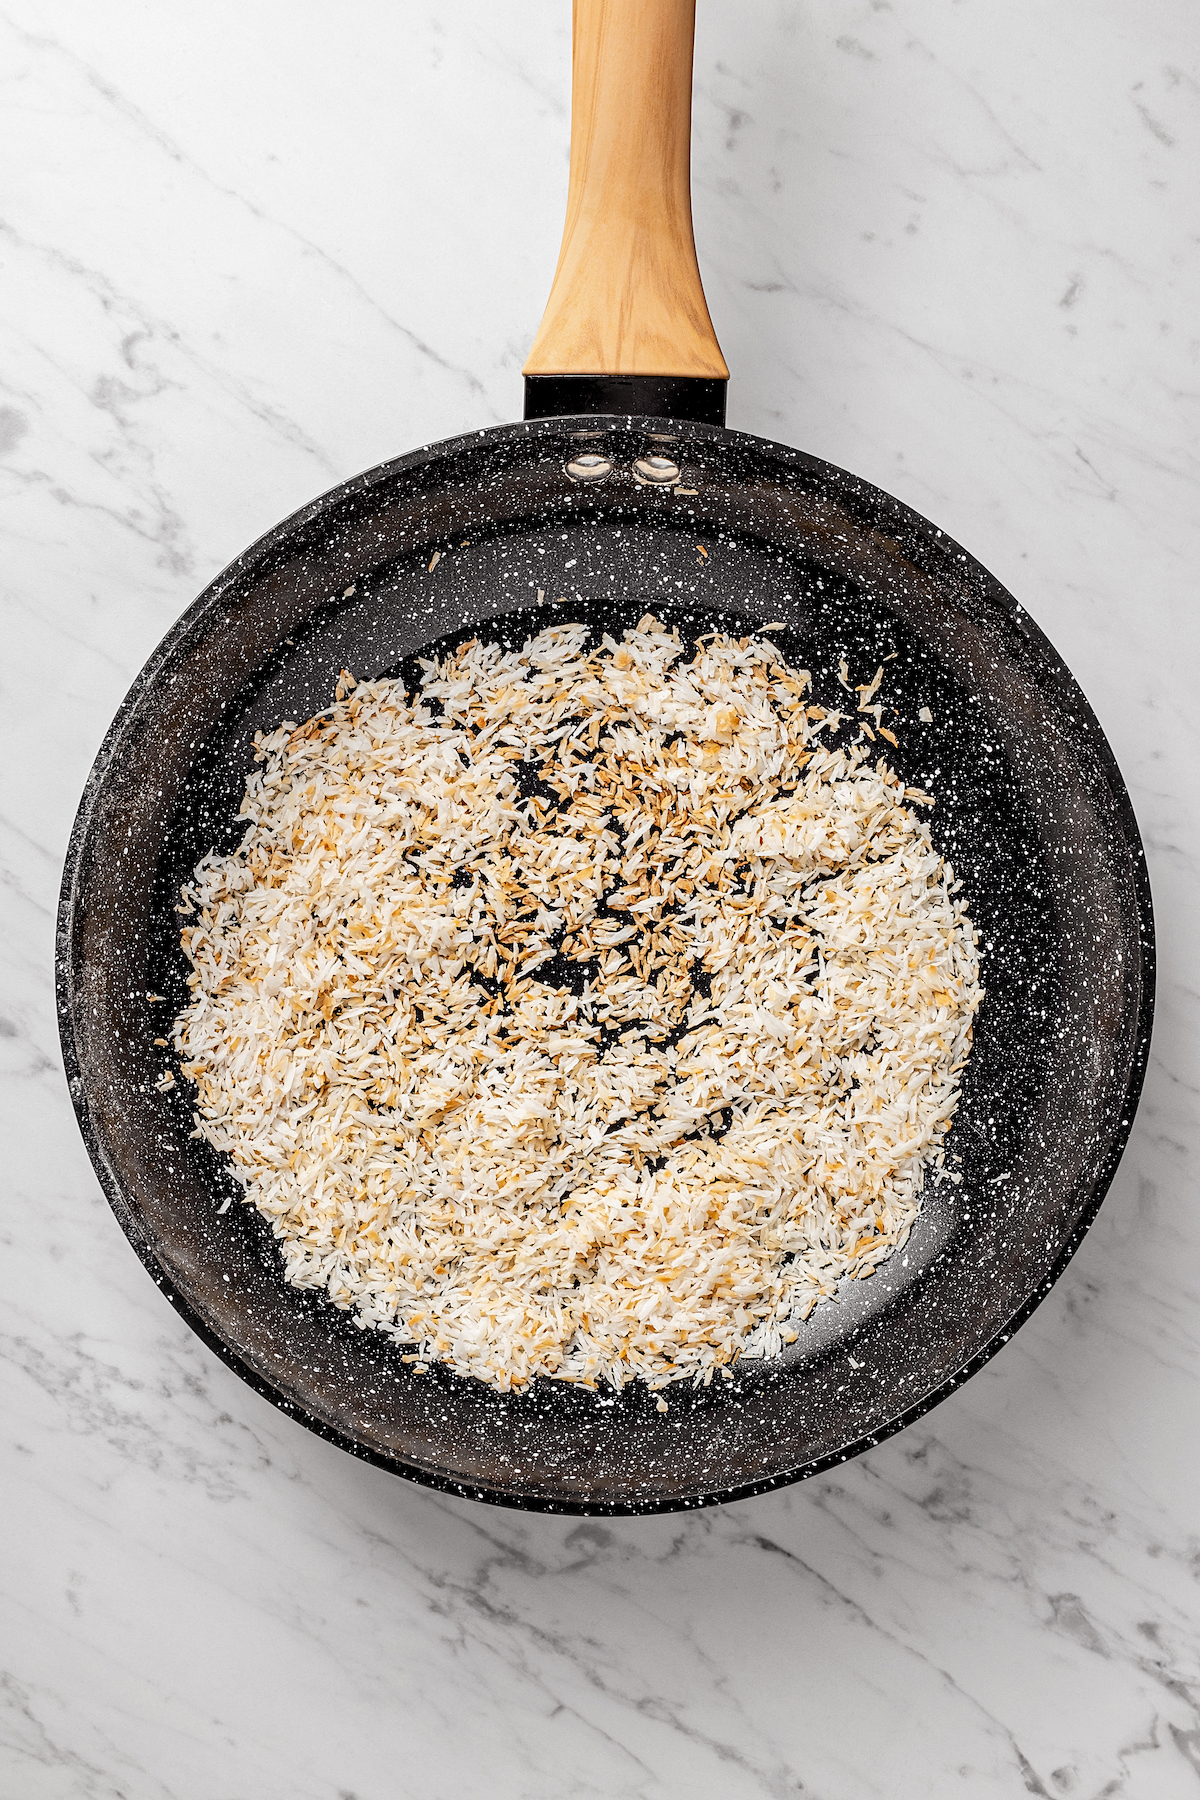 Overhead view of coconut toasting in skillet